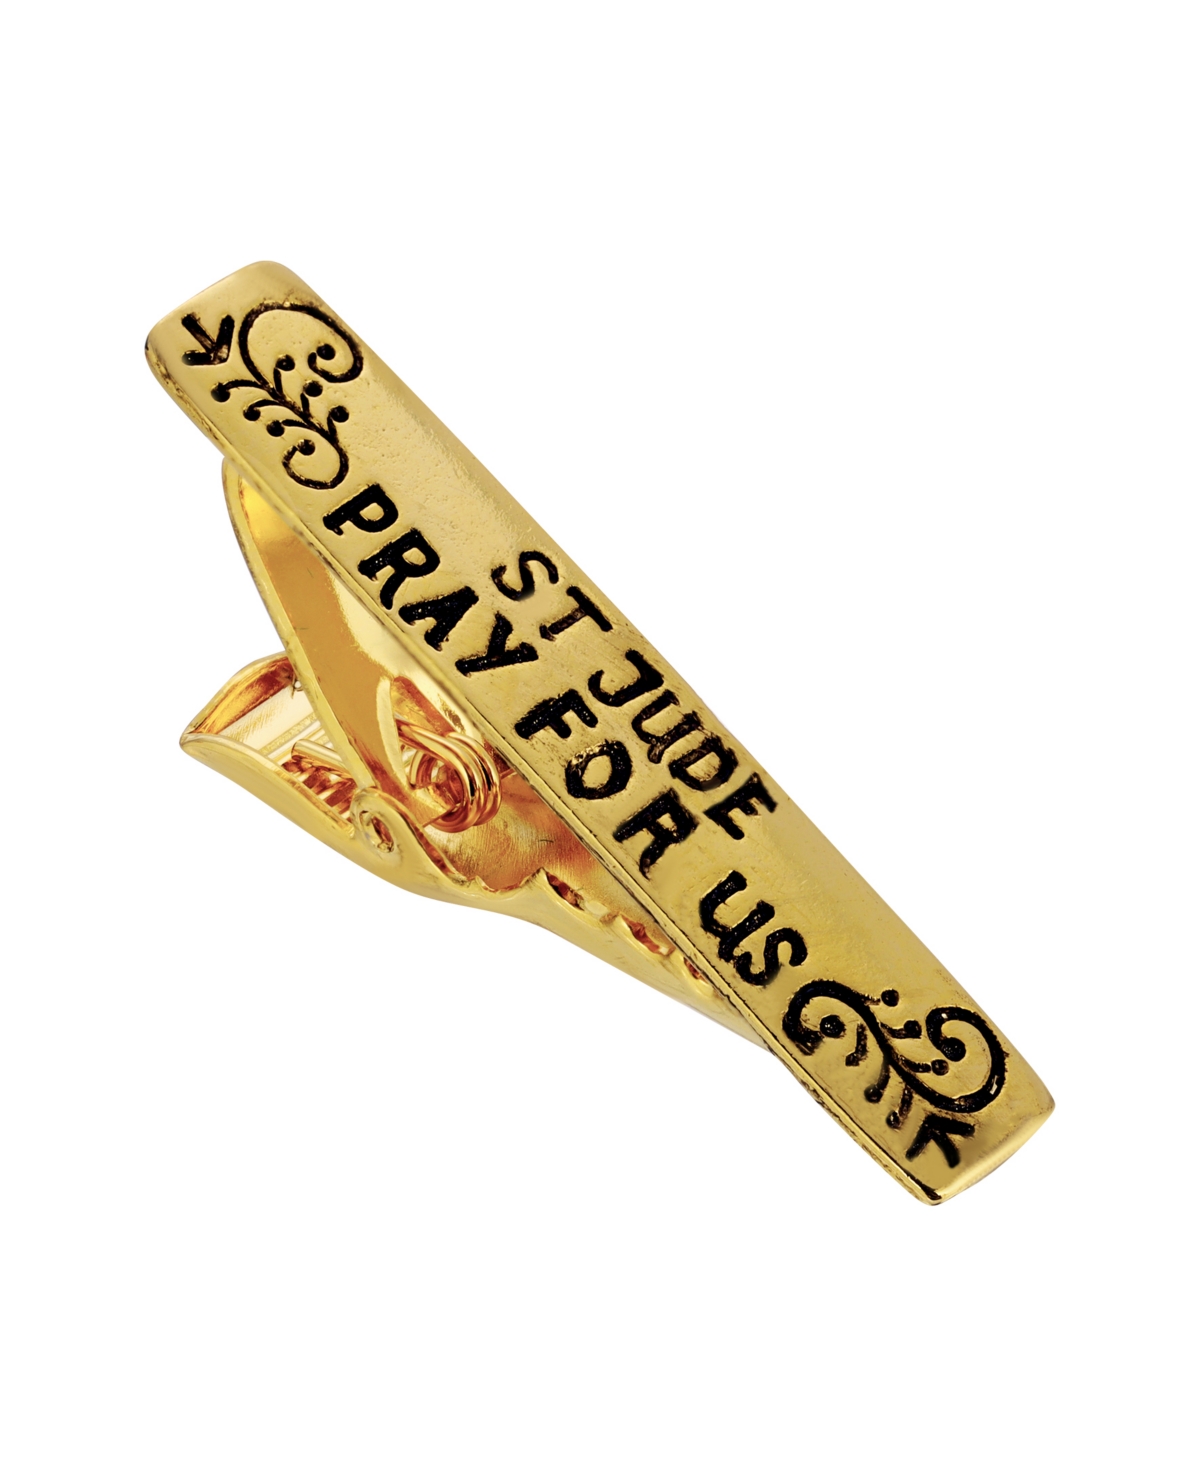 14K Gold-Dipped St. Jude "Pray For Us" Tie Bar Clip - Gold-Tone